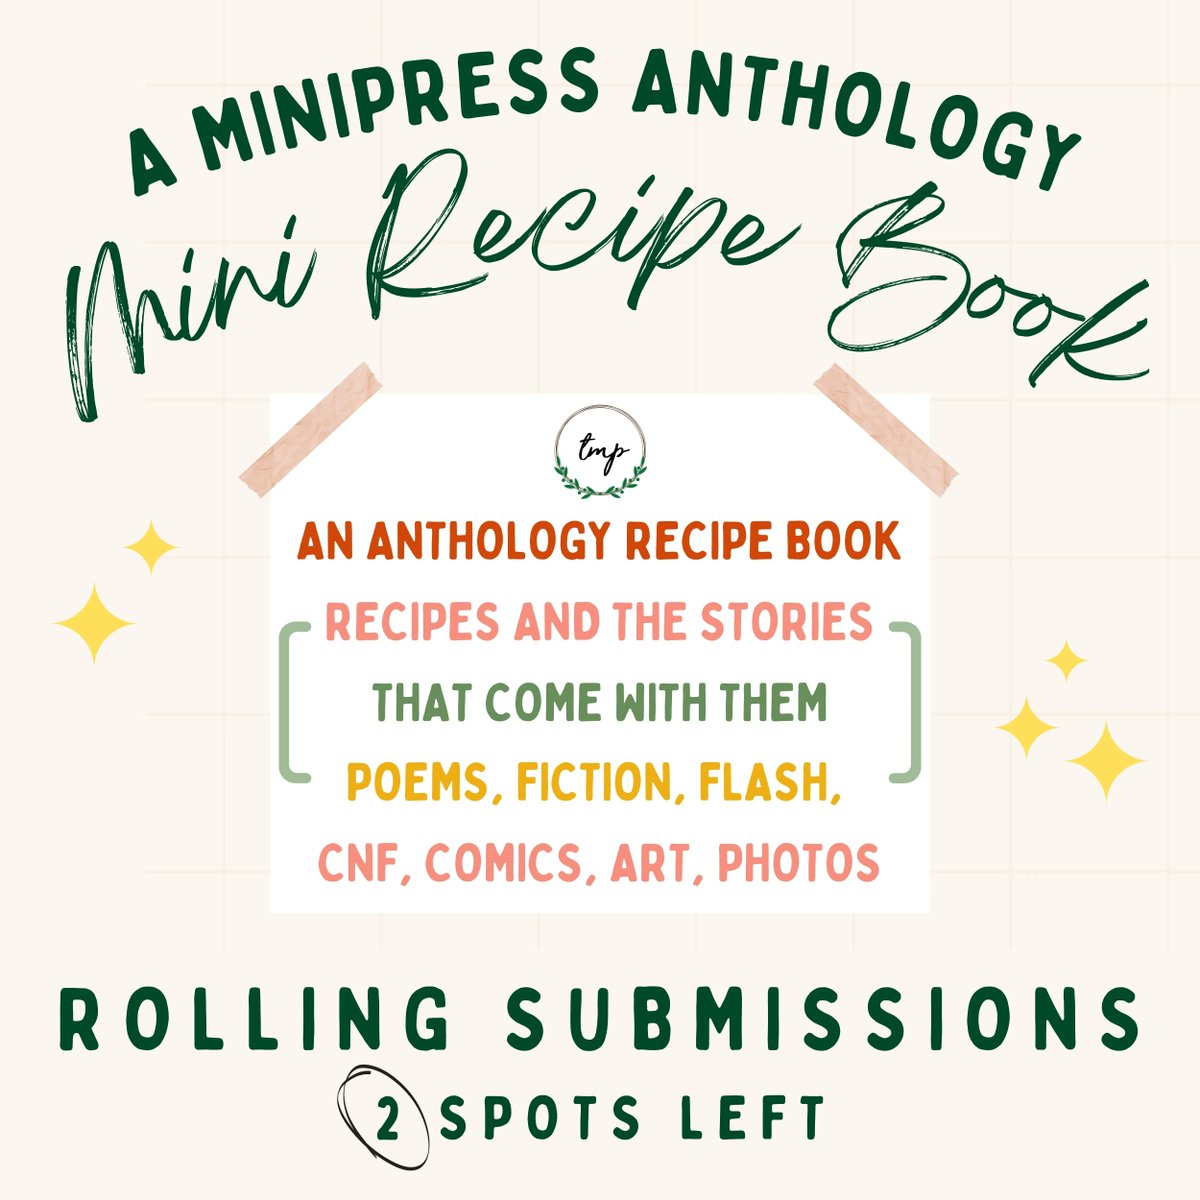 STILL 2 SPOTS LEFT! Get your recipes and accompanying poetry/artwork in before we fill up!

Submit to our first print issue! theminisonproject.com/minipress

#MiniPress #RecipeAnthology #FoodWriting